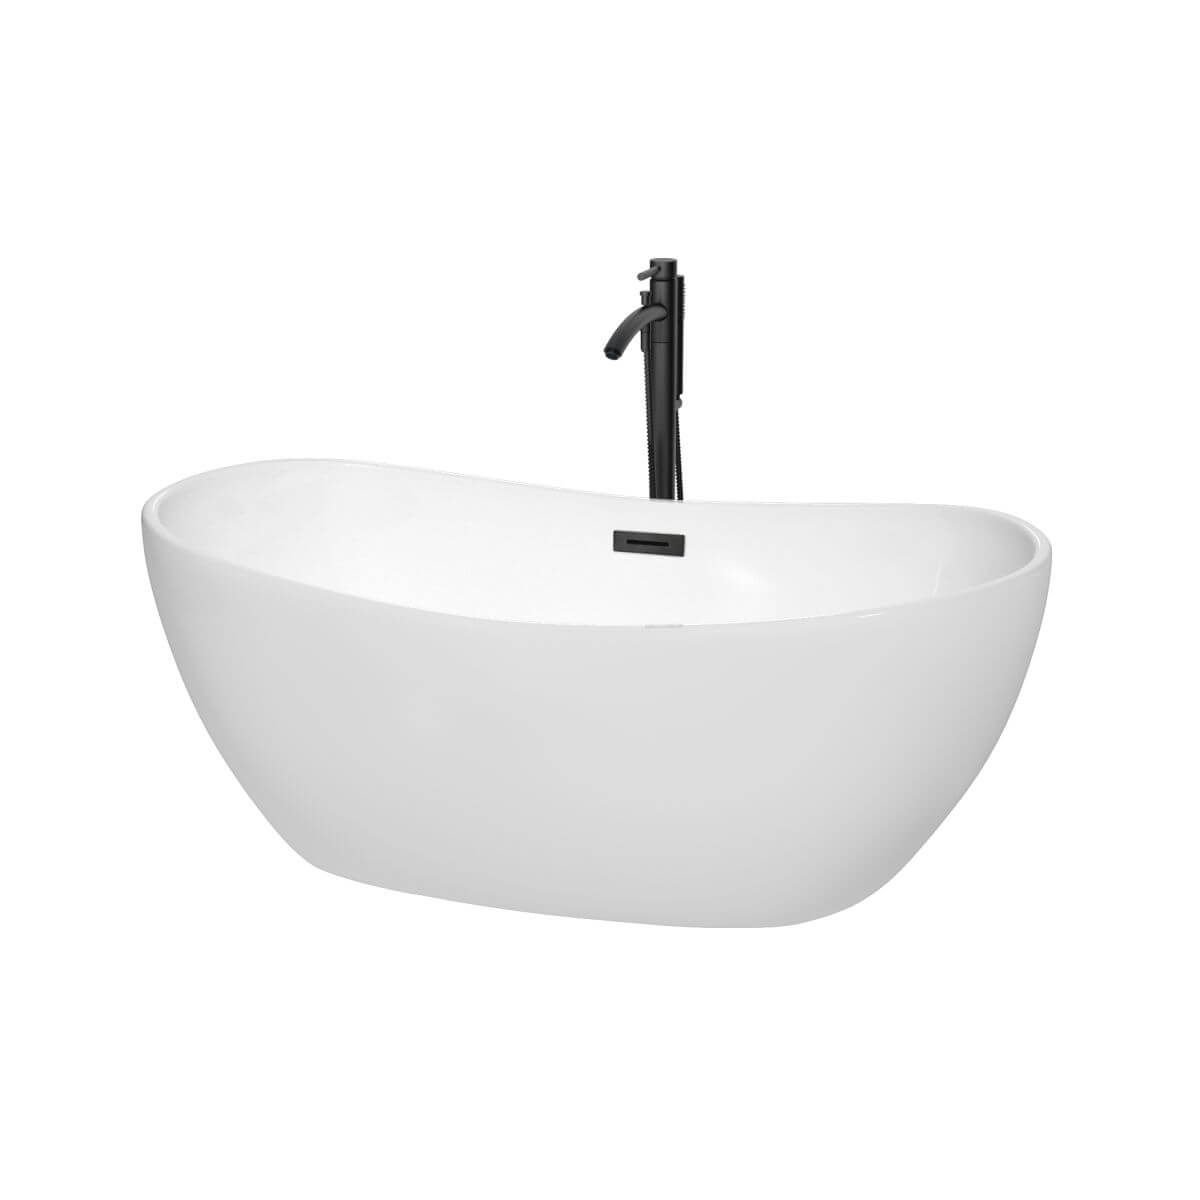 Wyndham Collection Rebecca 60 inch Freestanding Bathtub in White with Floor Mounted Faucet, Drain and Overflow Trim in Matte Black - WCOBT101460MBATPBK